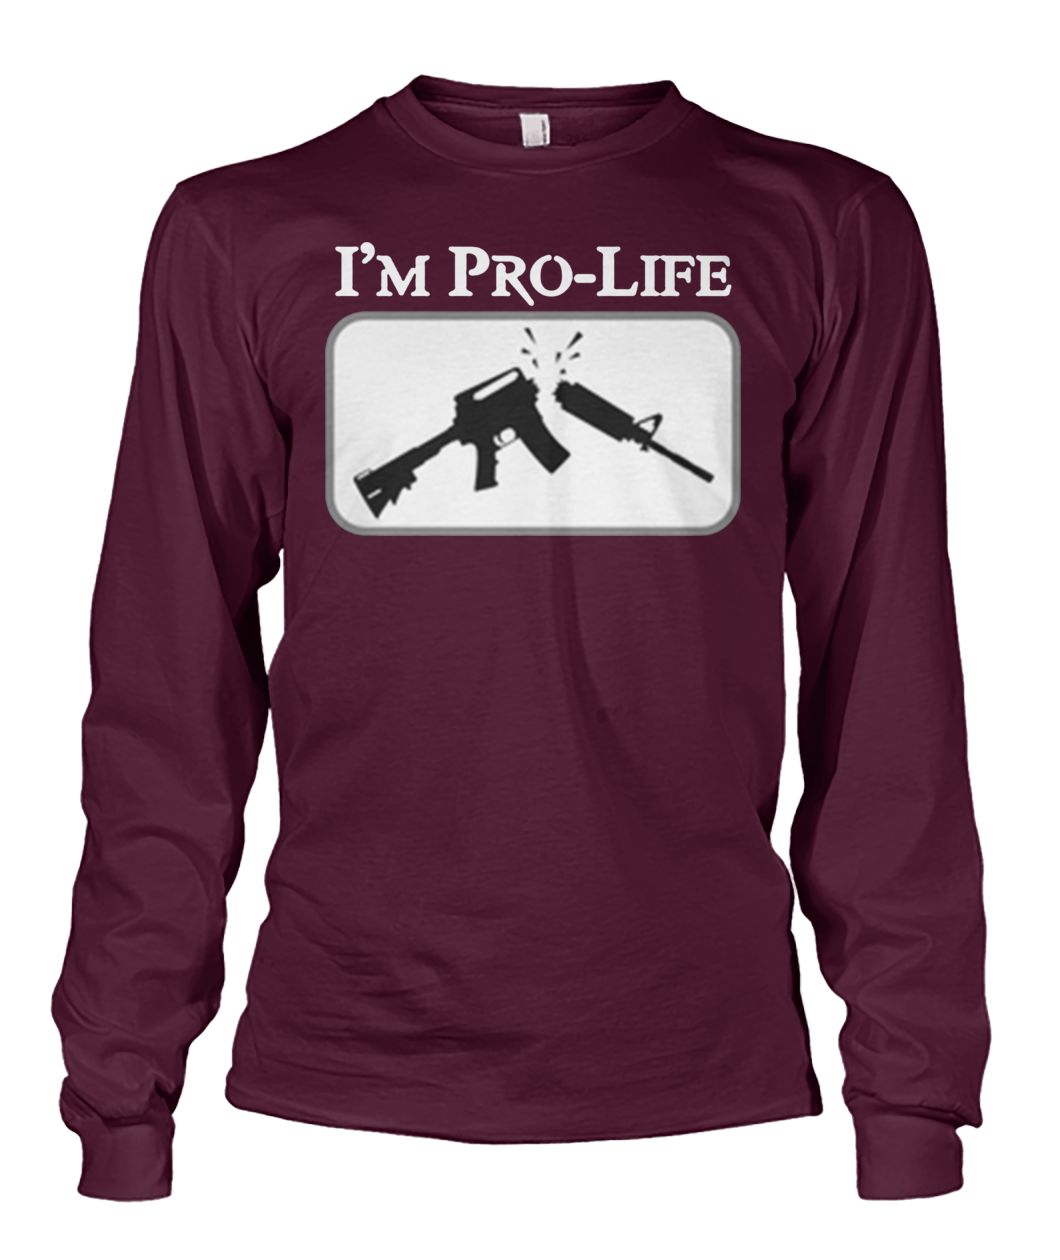 This is pro-life unisex long sleeve